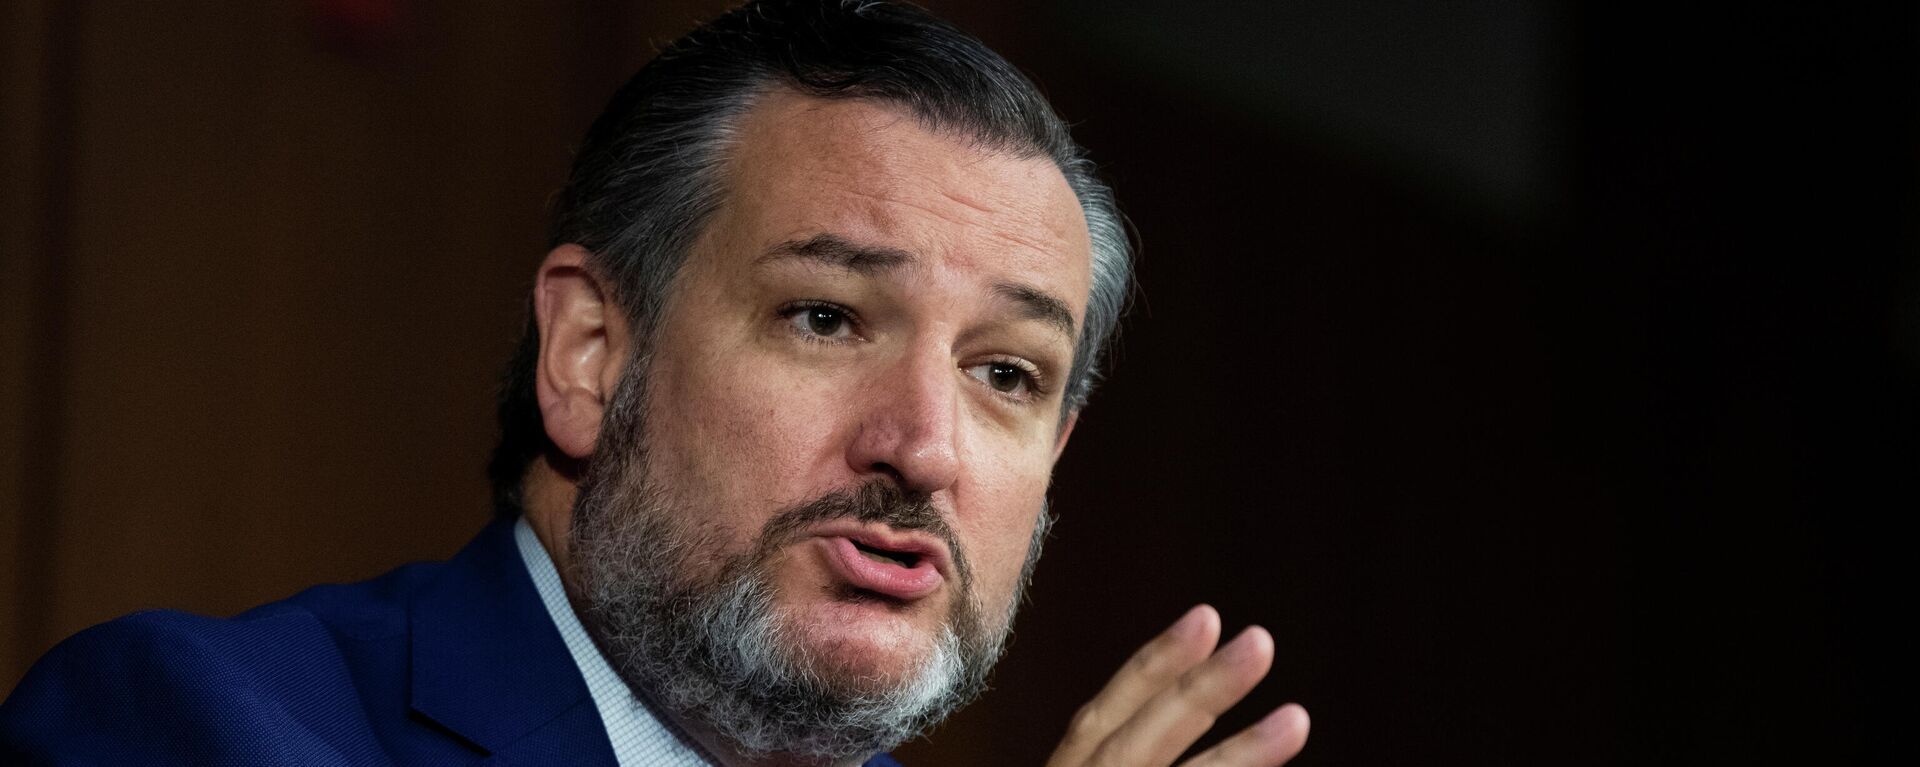 Senator Ted Cruz, R-Texas, speaks during the Senate Judiciary Committee hearing titled Texas Unconstitutional Abortion Ban and the Role of the Shadow Docket, in Hart Senate Office Building, Washington, U.S., September 29, 2021 - Sputnik International, 1920, 29.09.2021